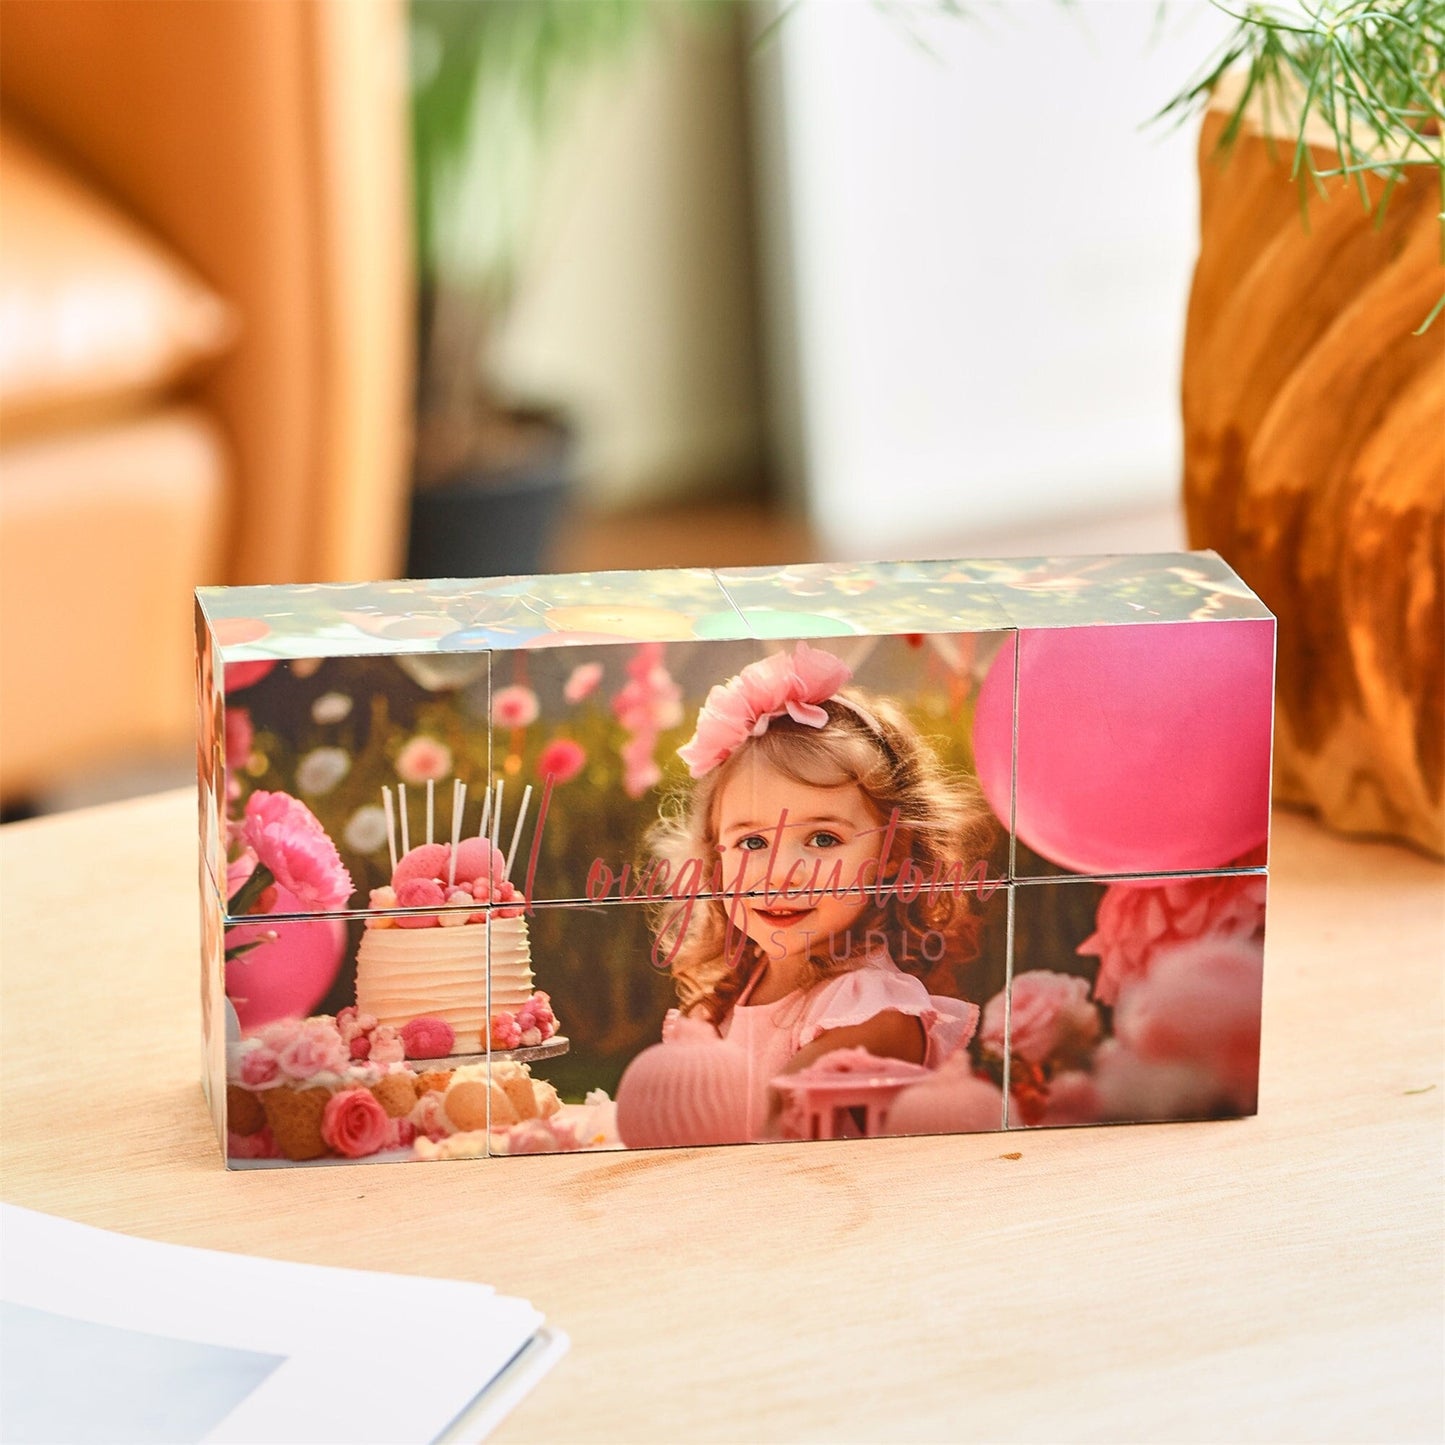 Custom Infinity Photo Cube, Blended family gift, party surprise gifts, Birthday Gift kids photo cube pet memorial, gift for him her